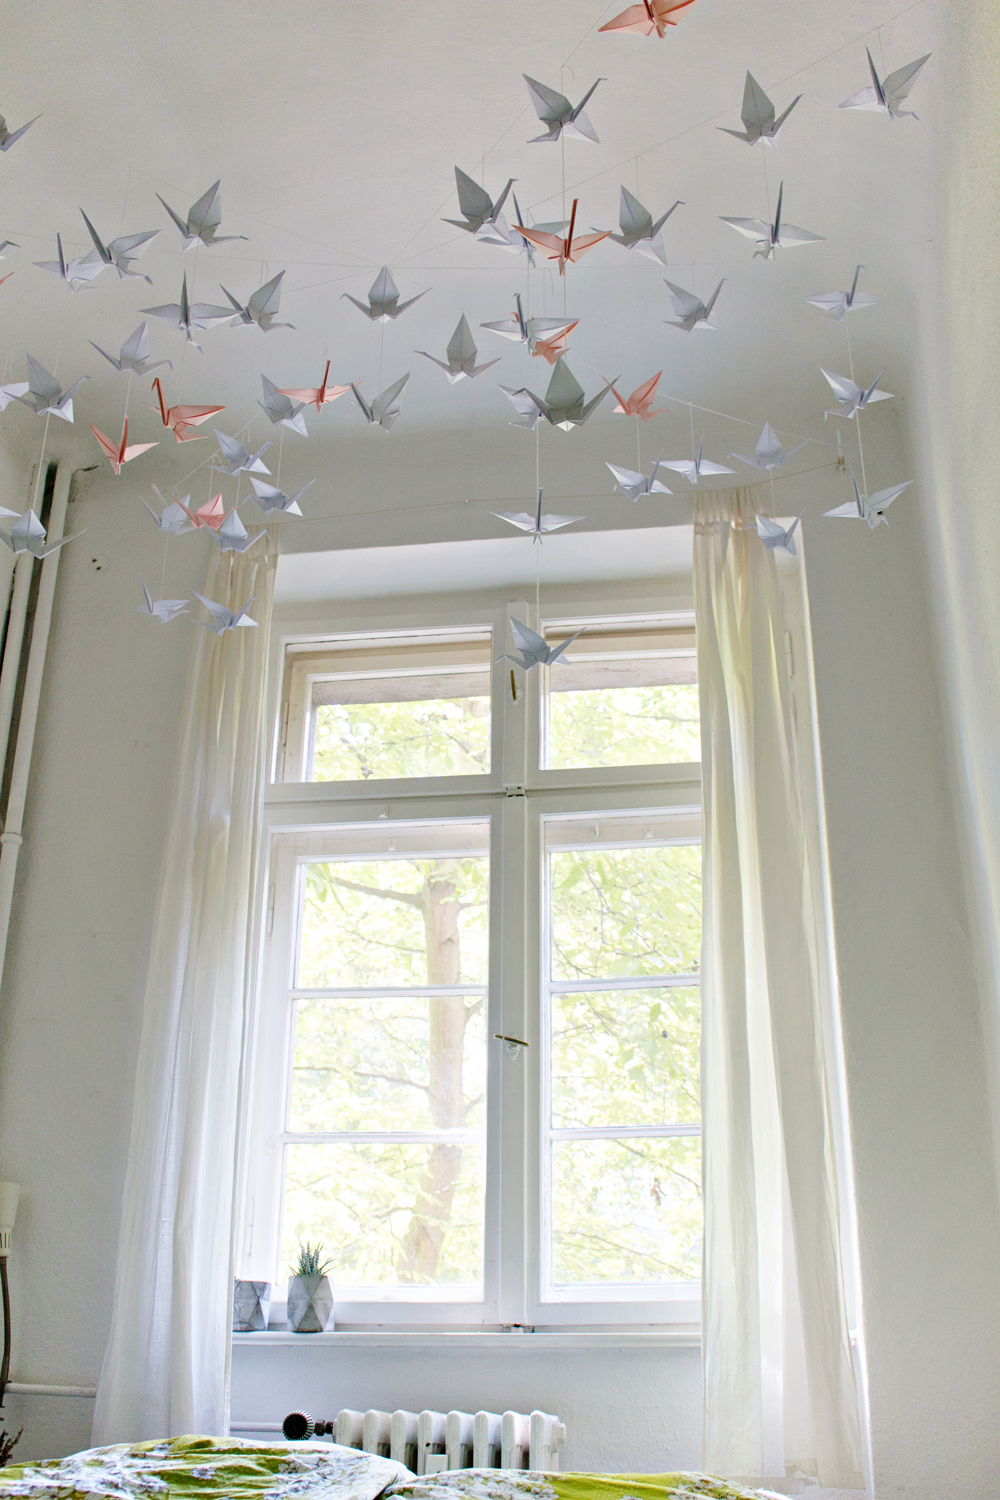 15+ Diy Hanging Butterflies From Ceiling Gif